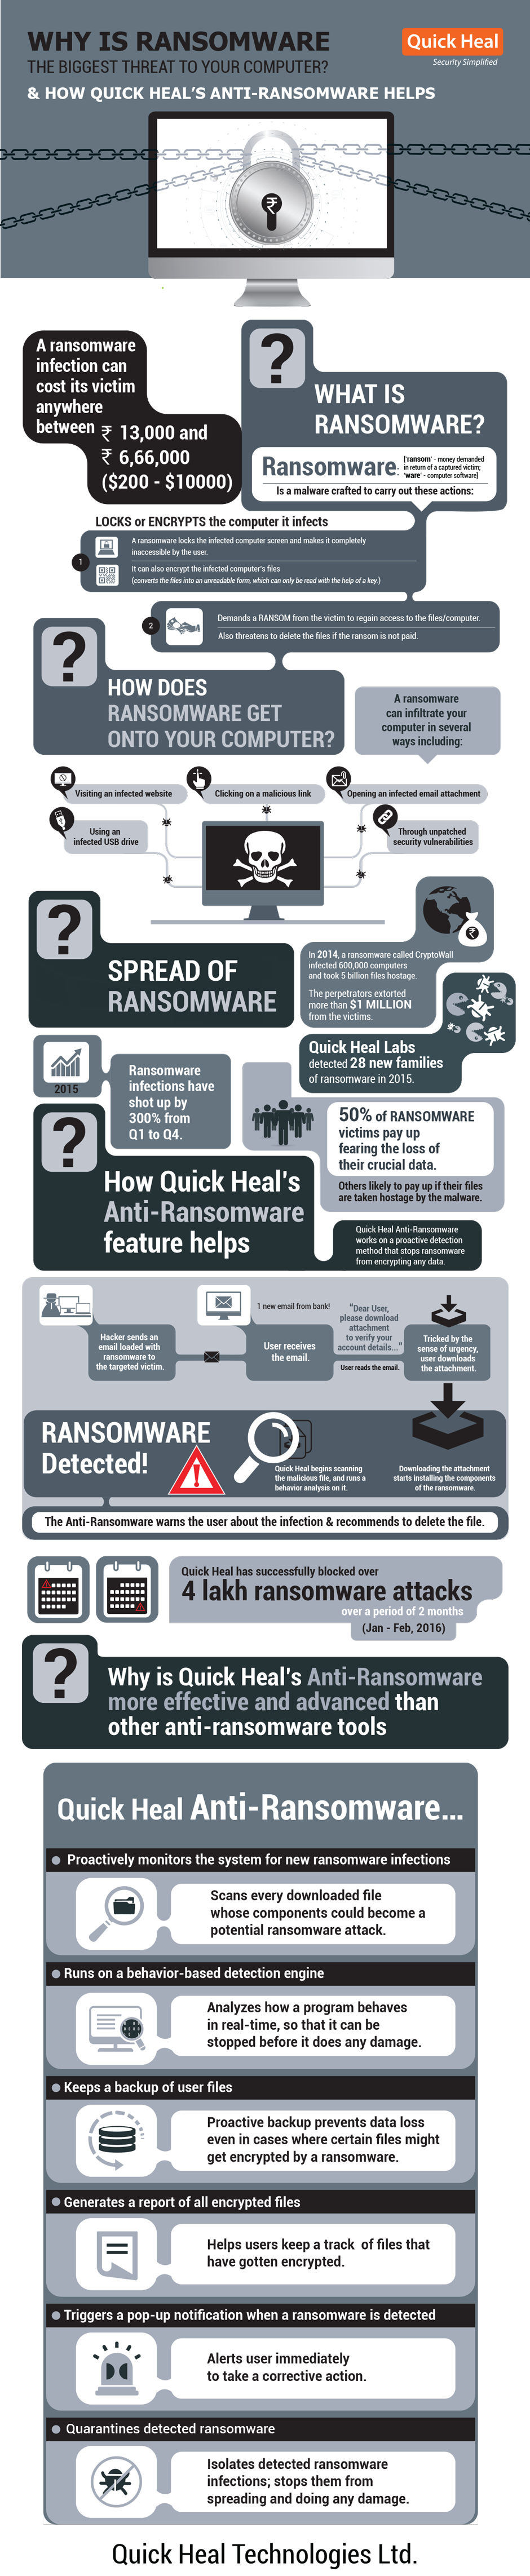 anti_ransomware_infographic_quick-heal